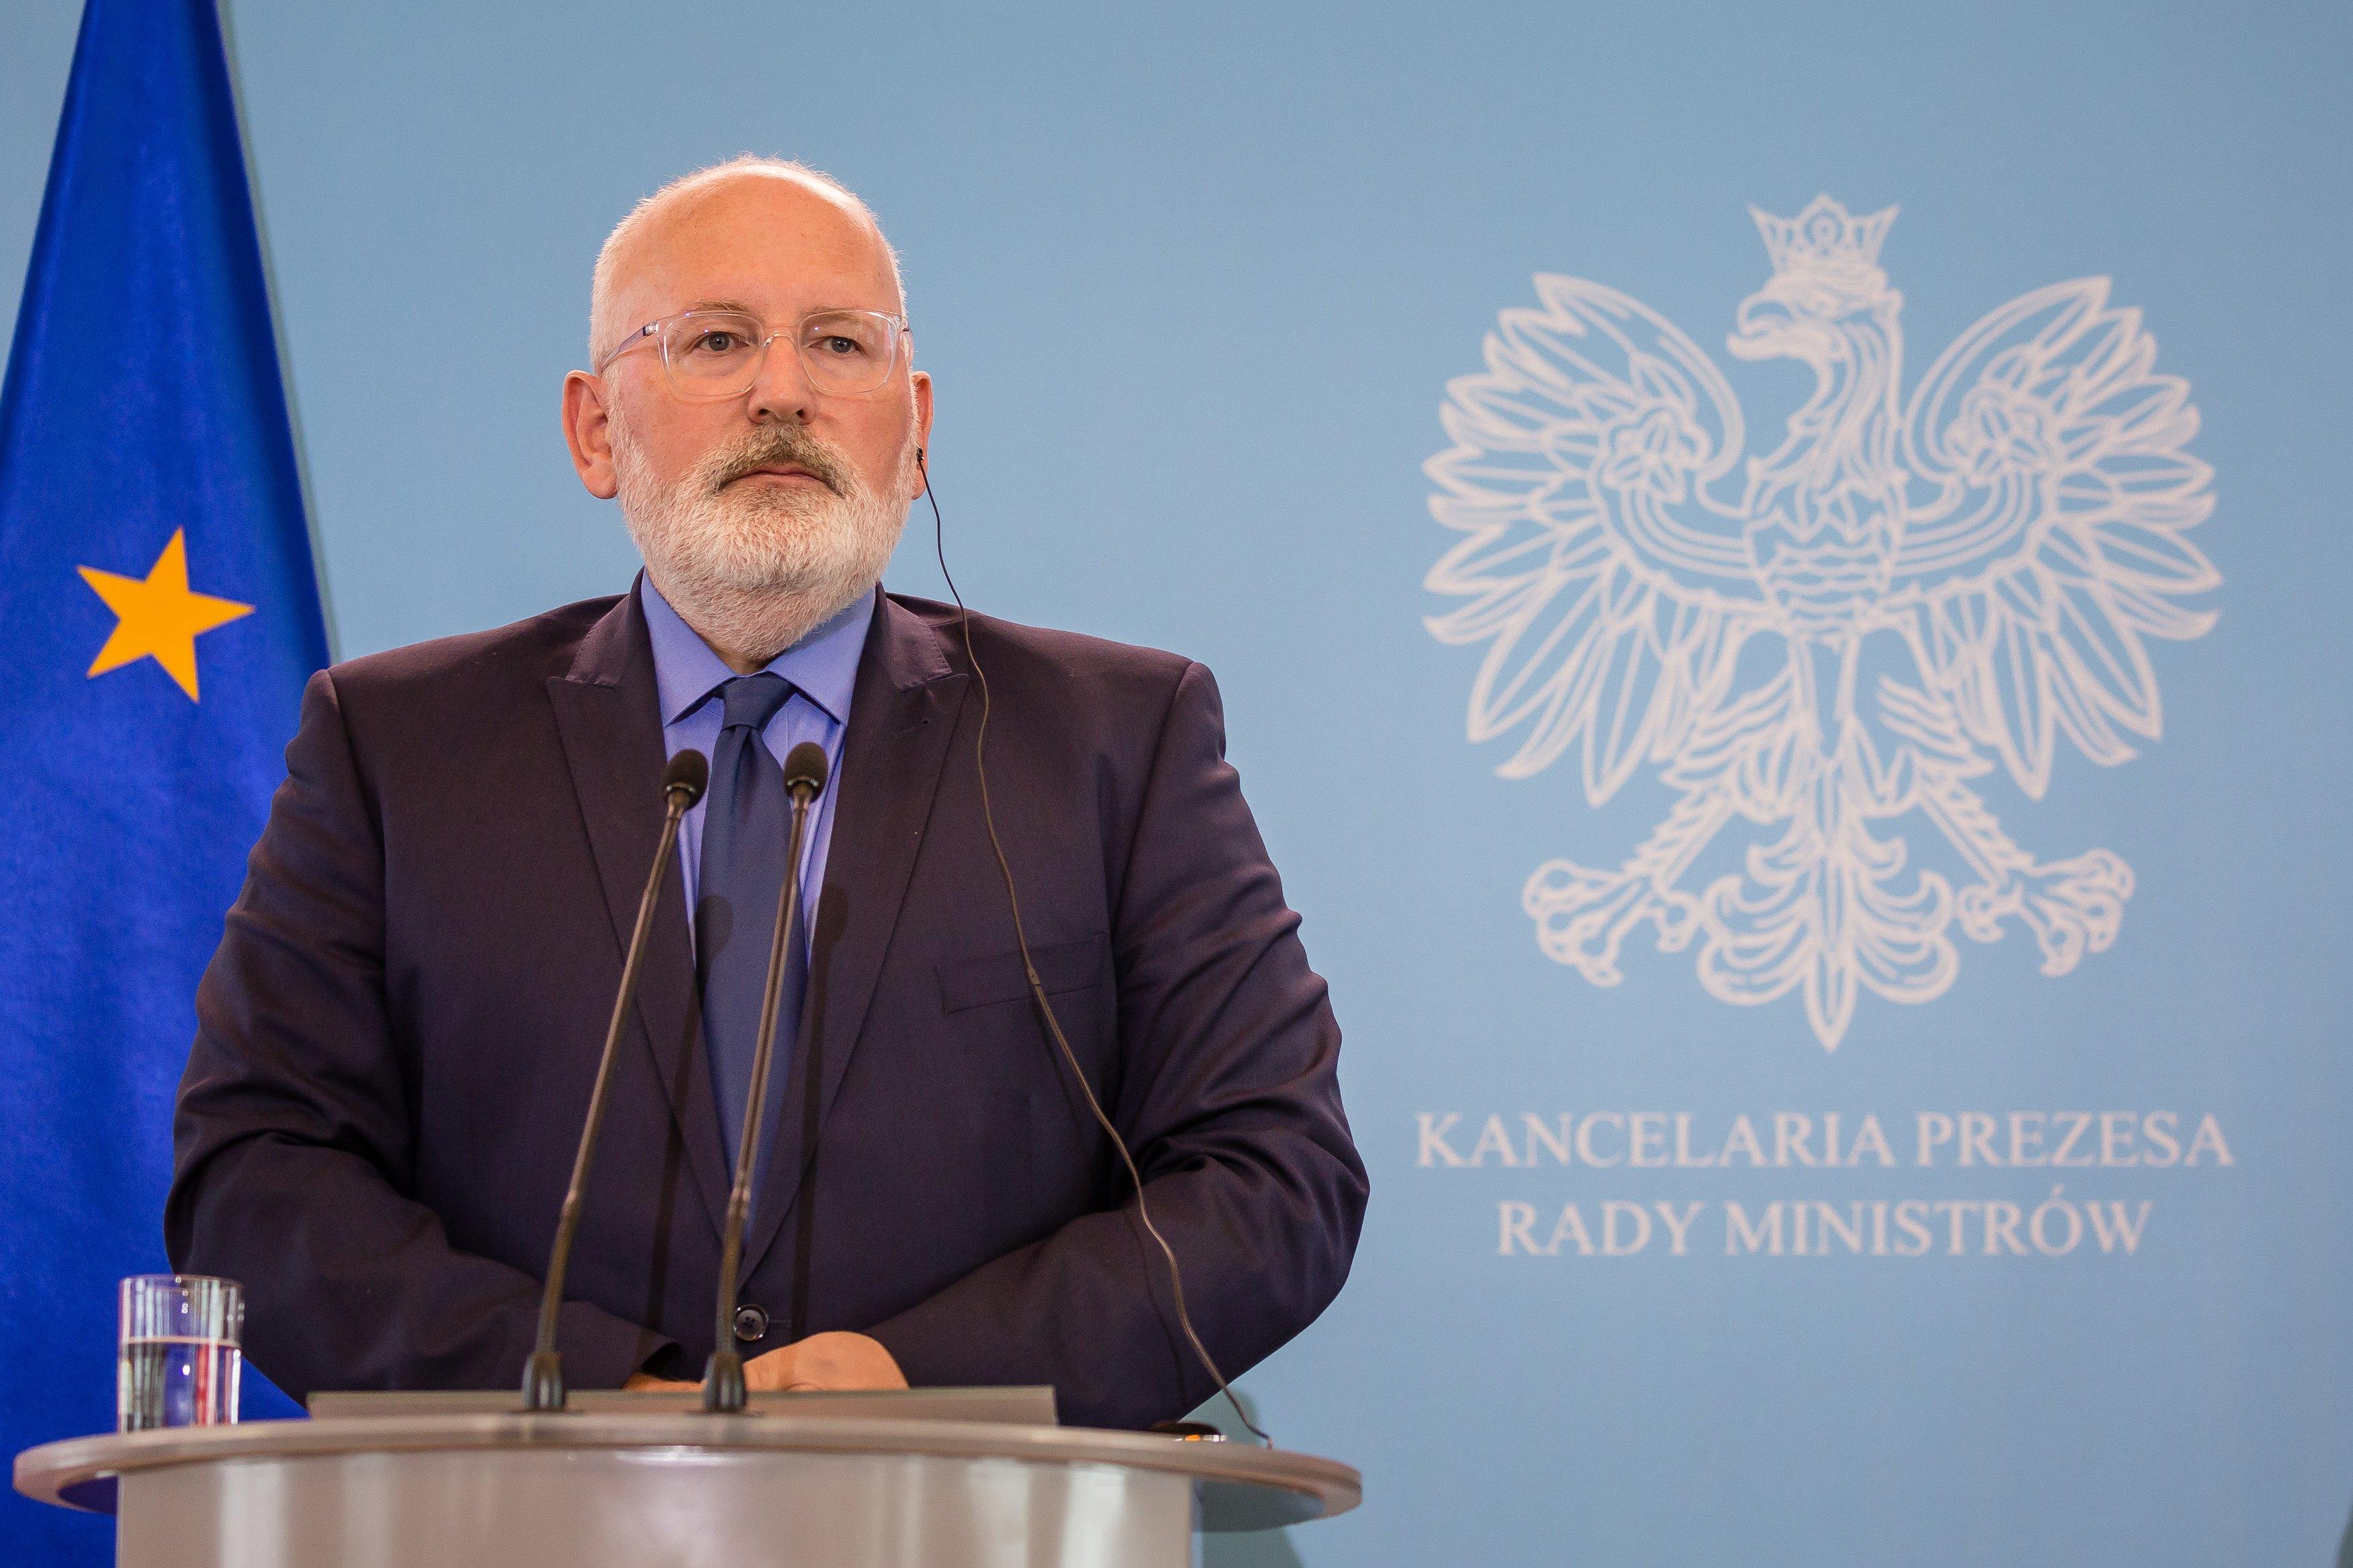 Poland, Warsaw: European Commissioner Frans Timmermans is seen during jin press conferance after meeting with Polish Prime Minister Mateusz Morawiecki , Warsaw, June 18, 2018.